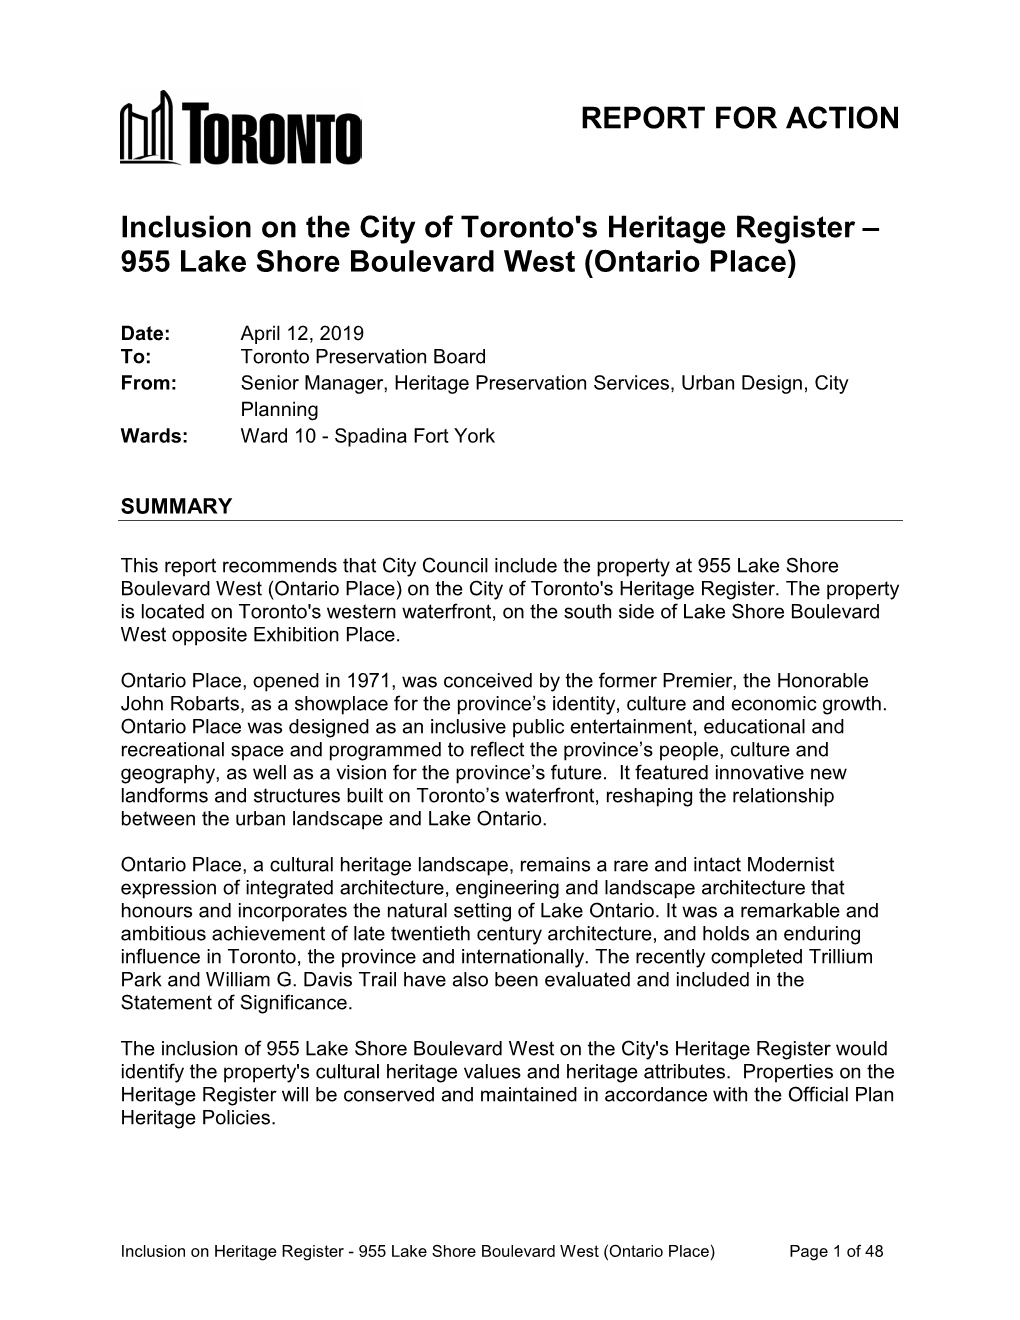 Inclusion on the City of Toronto's Heritage Register –955 Lake Shore Boulevard West (Ontario Place)